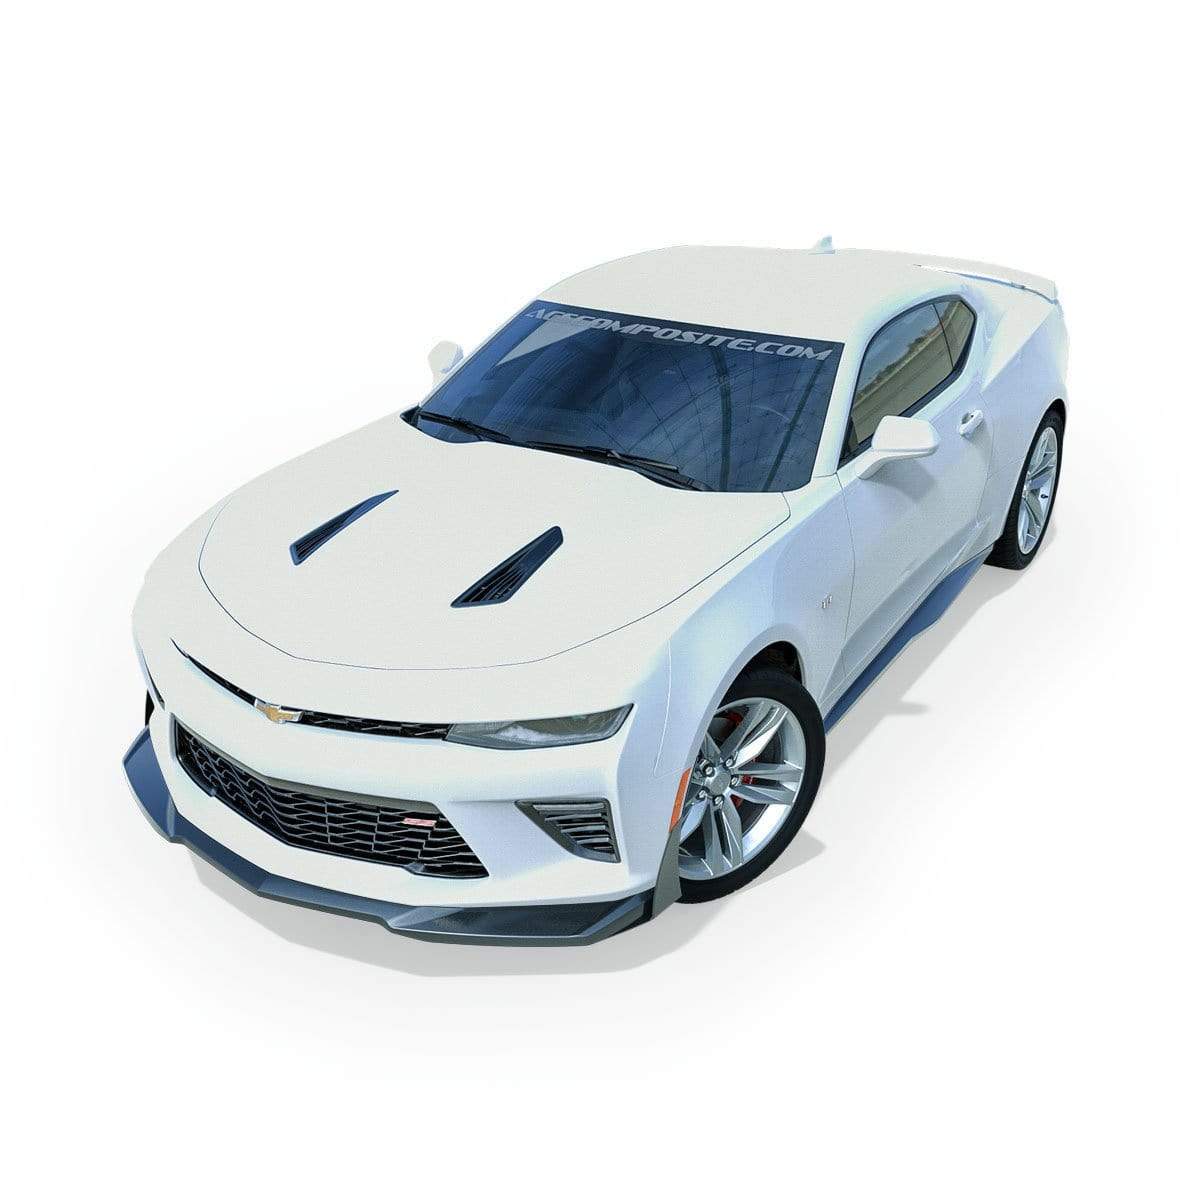 ACS ZL1 Aeropack for Camaro SS in primer with splitter and side rockers, SKU [48-4-031|48-4-039]GBA.